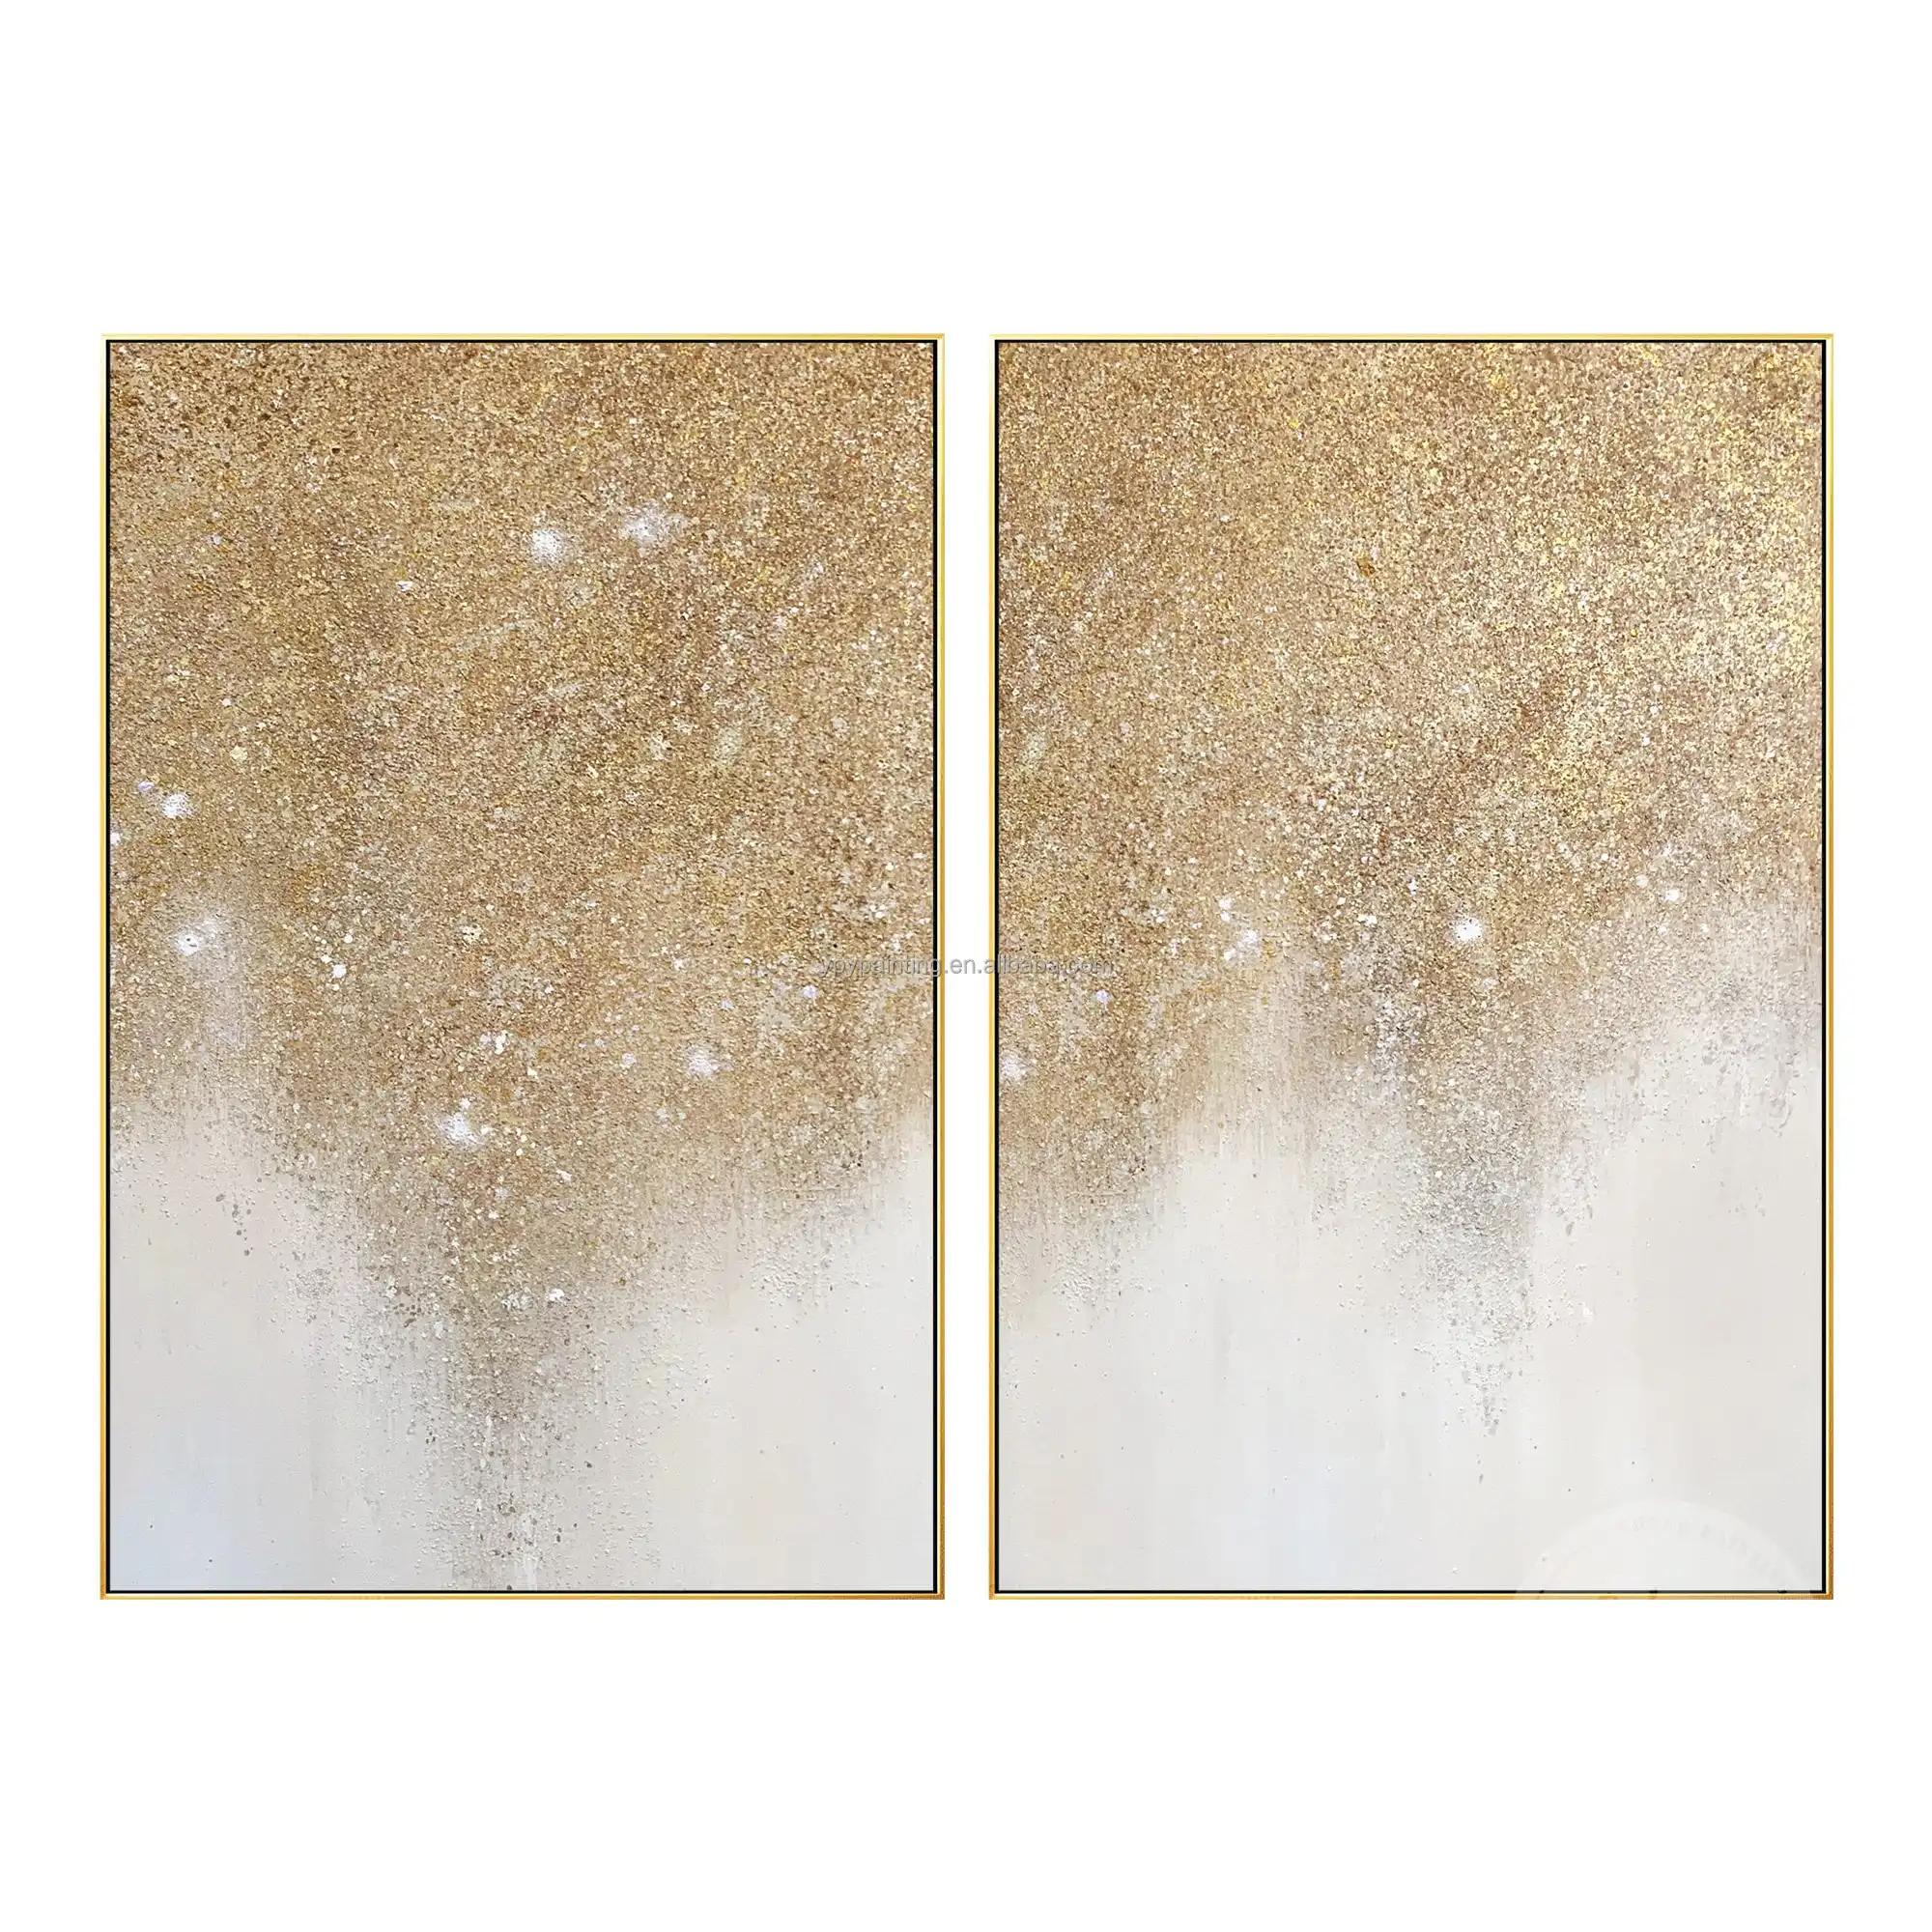 Abstract Gold Glitter Modern Handmade lussuoso oro pallido sabbia Texture Canvas Painting Wall Art Decoration Canvas Painting